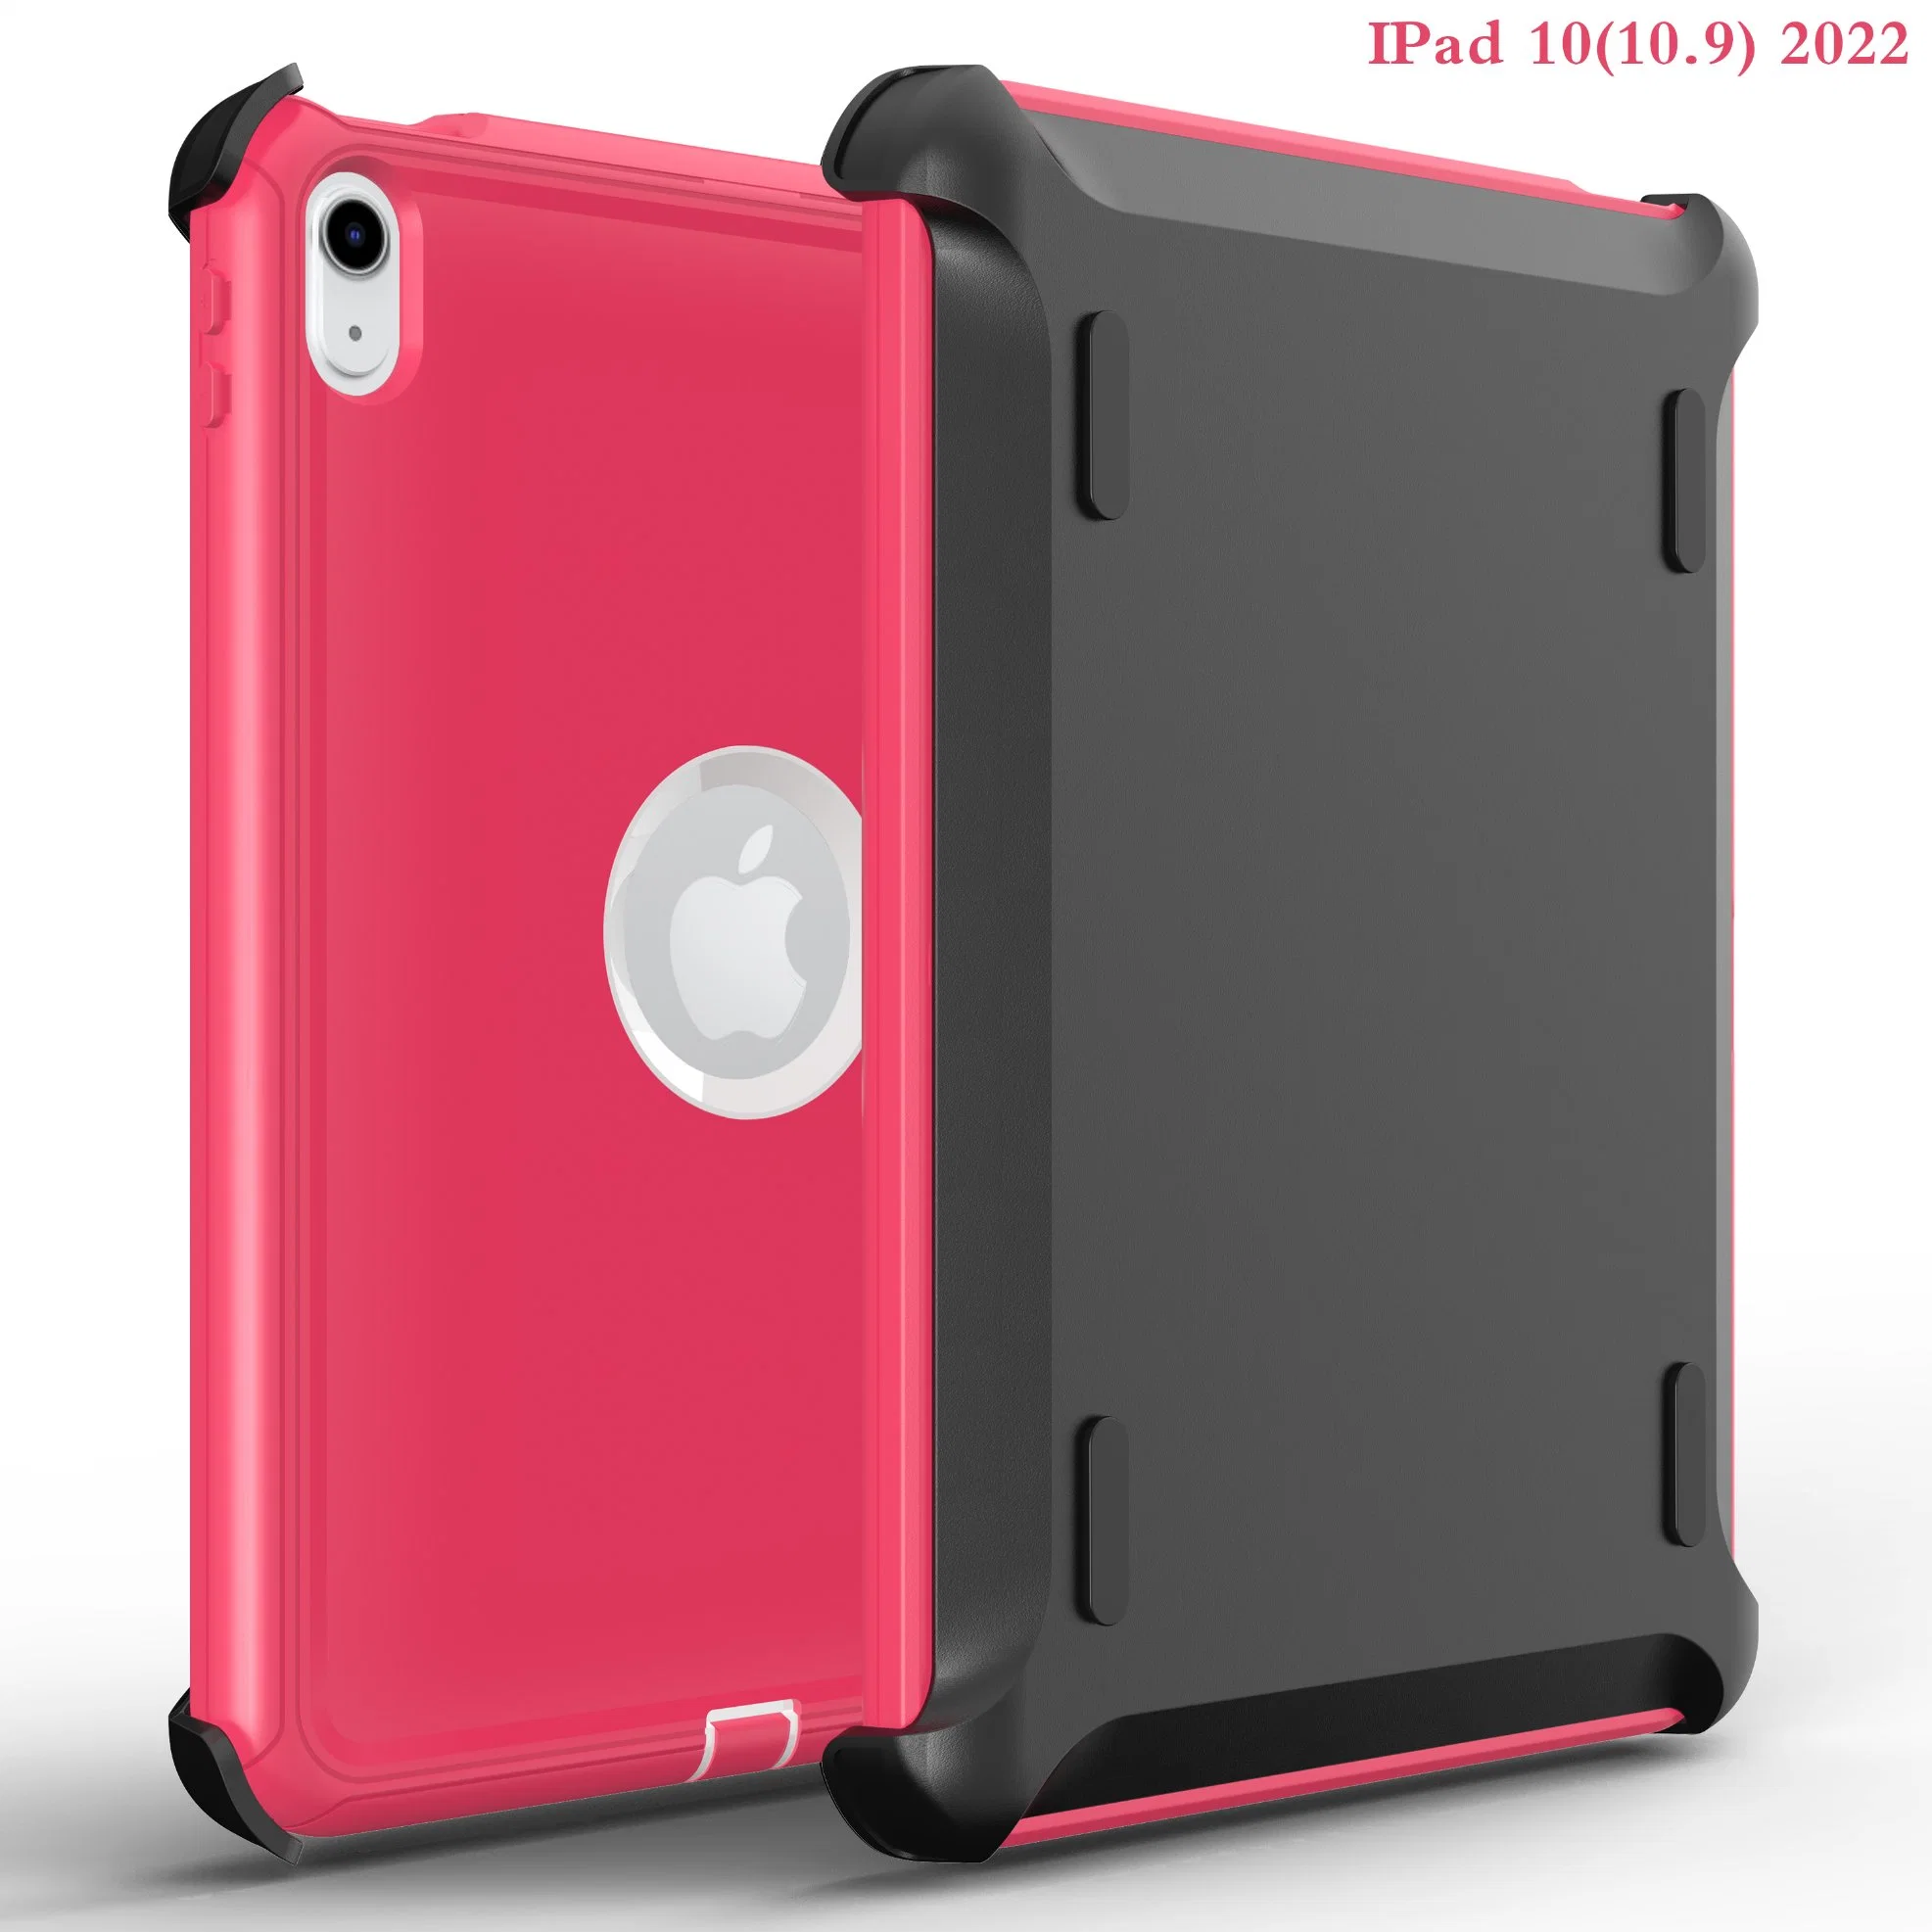 Tablet Cover Rugged Heavy Duty Combo Case for iPad 10.9 2022 Version